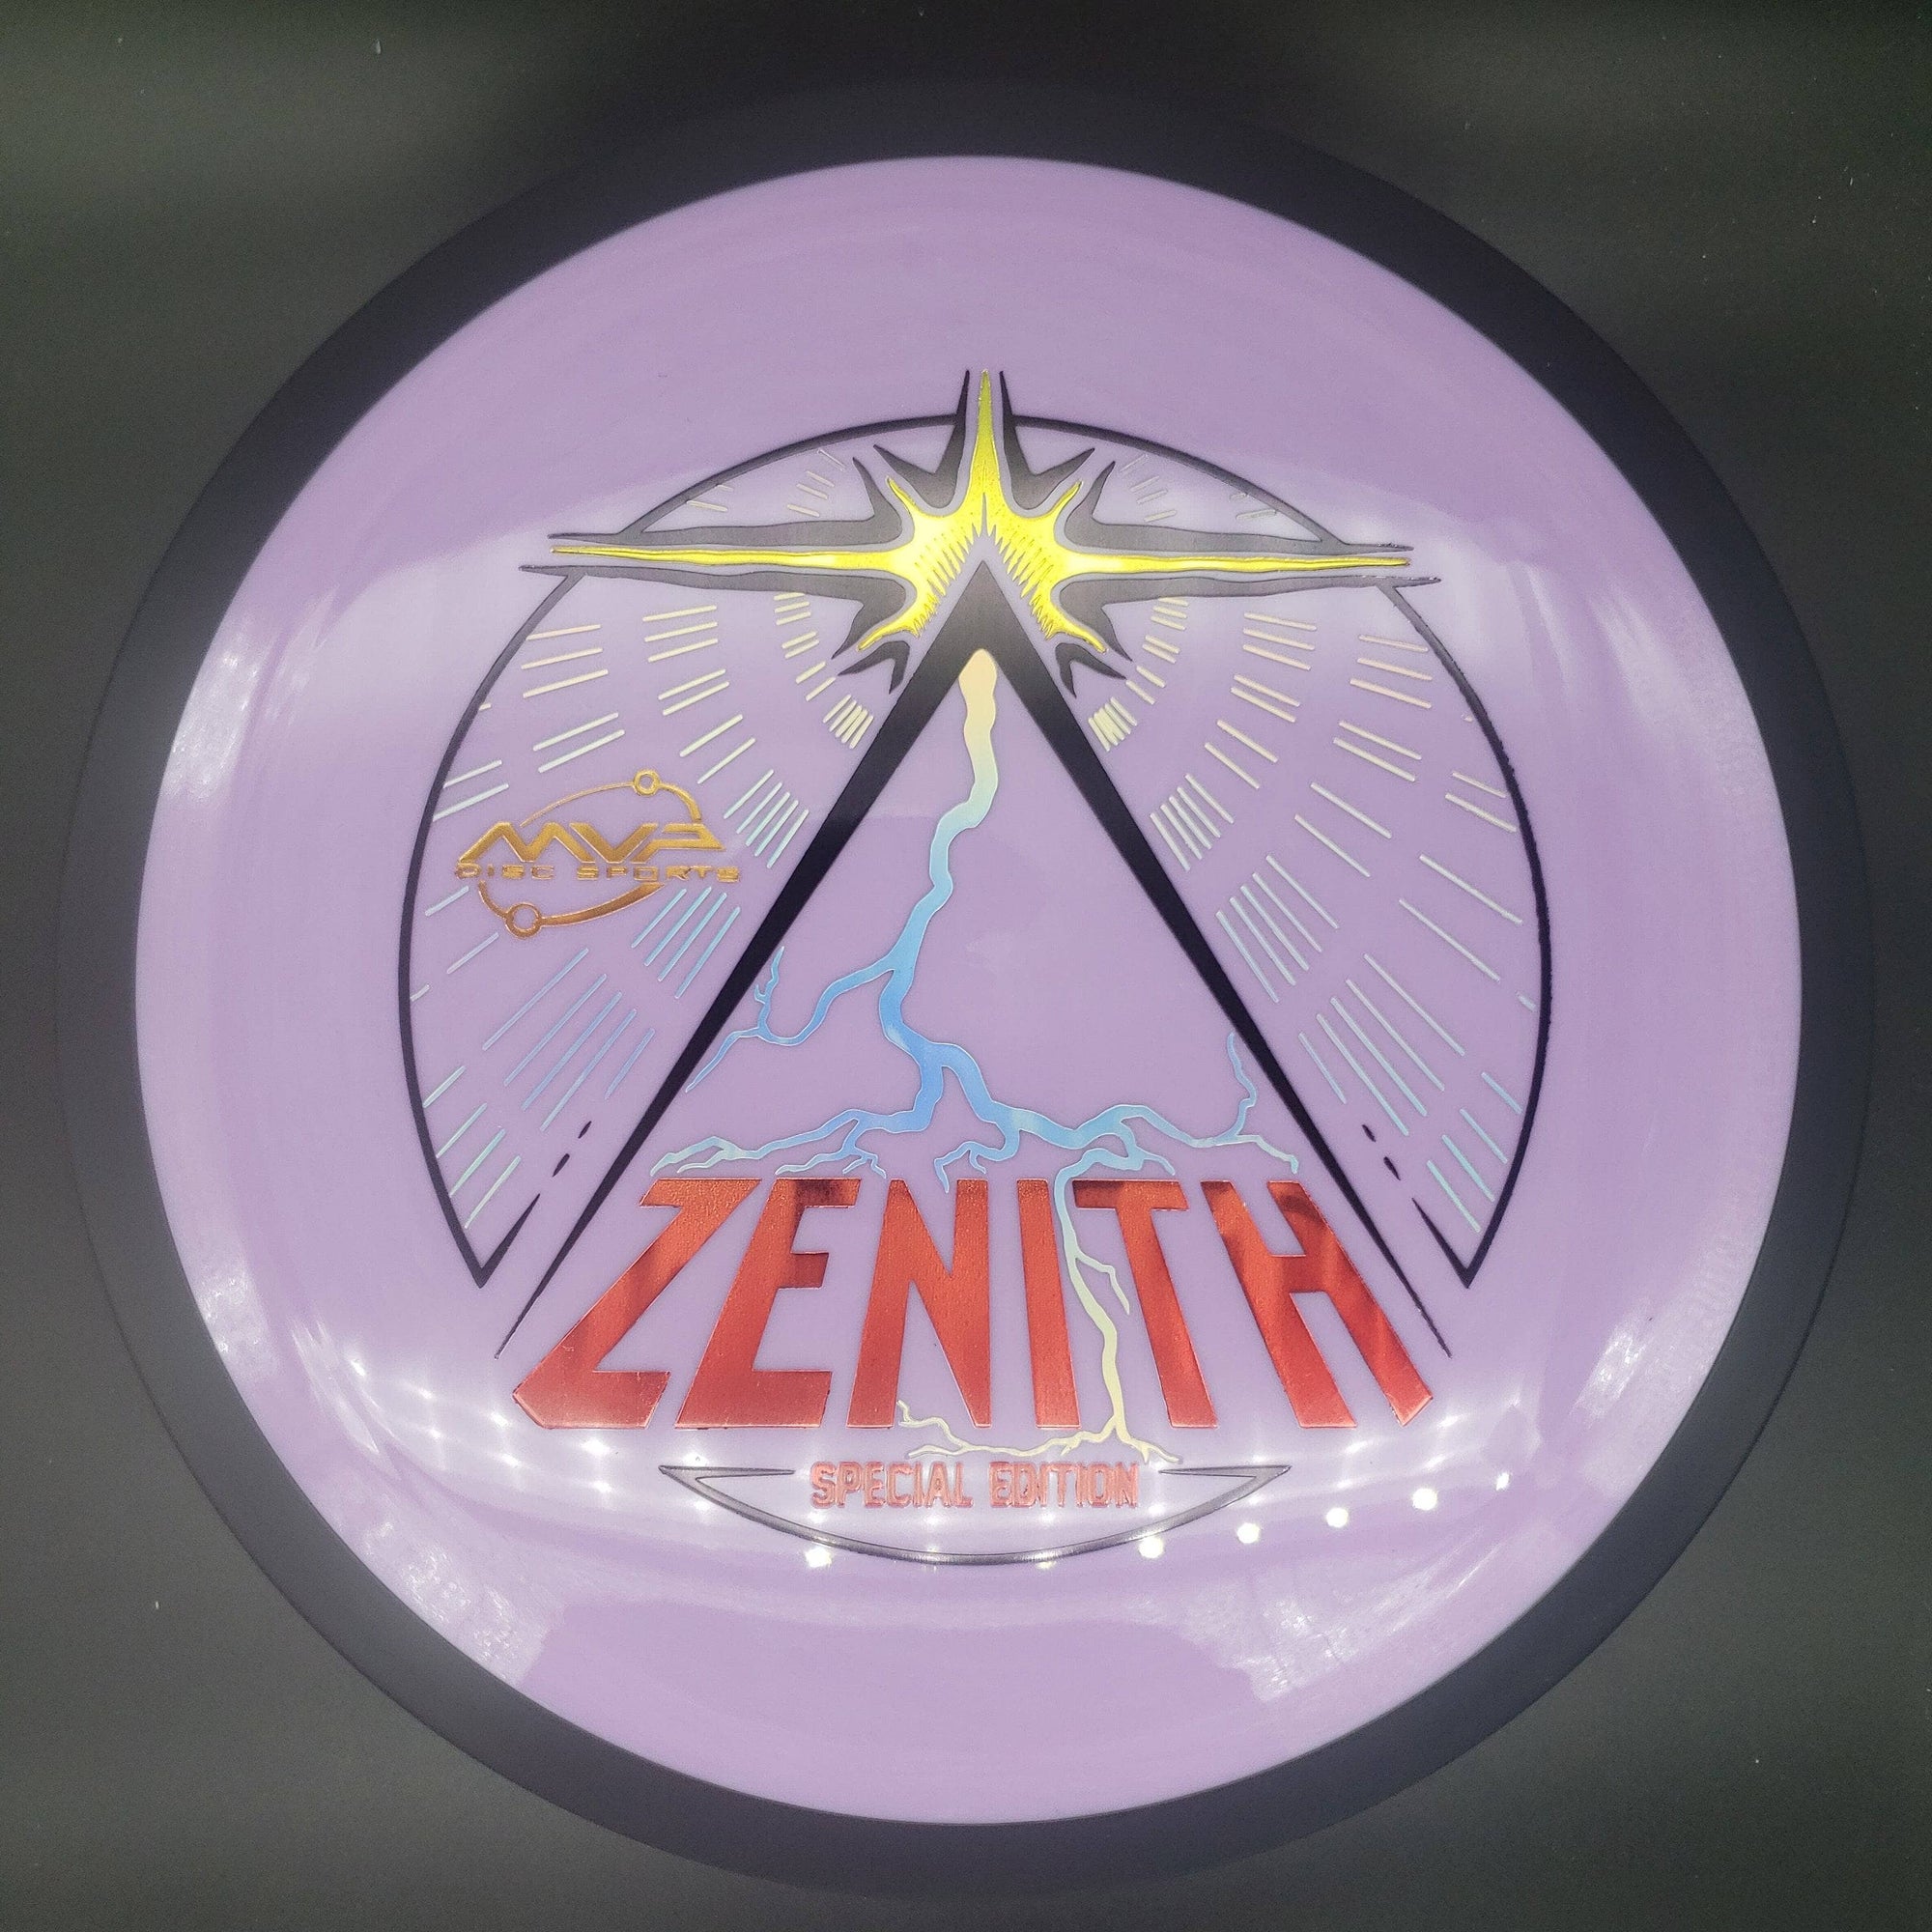 MVP Distance Driver Purple Red Gold 170g Zenith, Special Edition